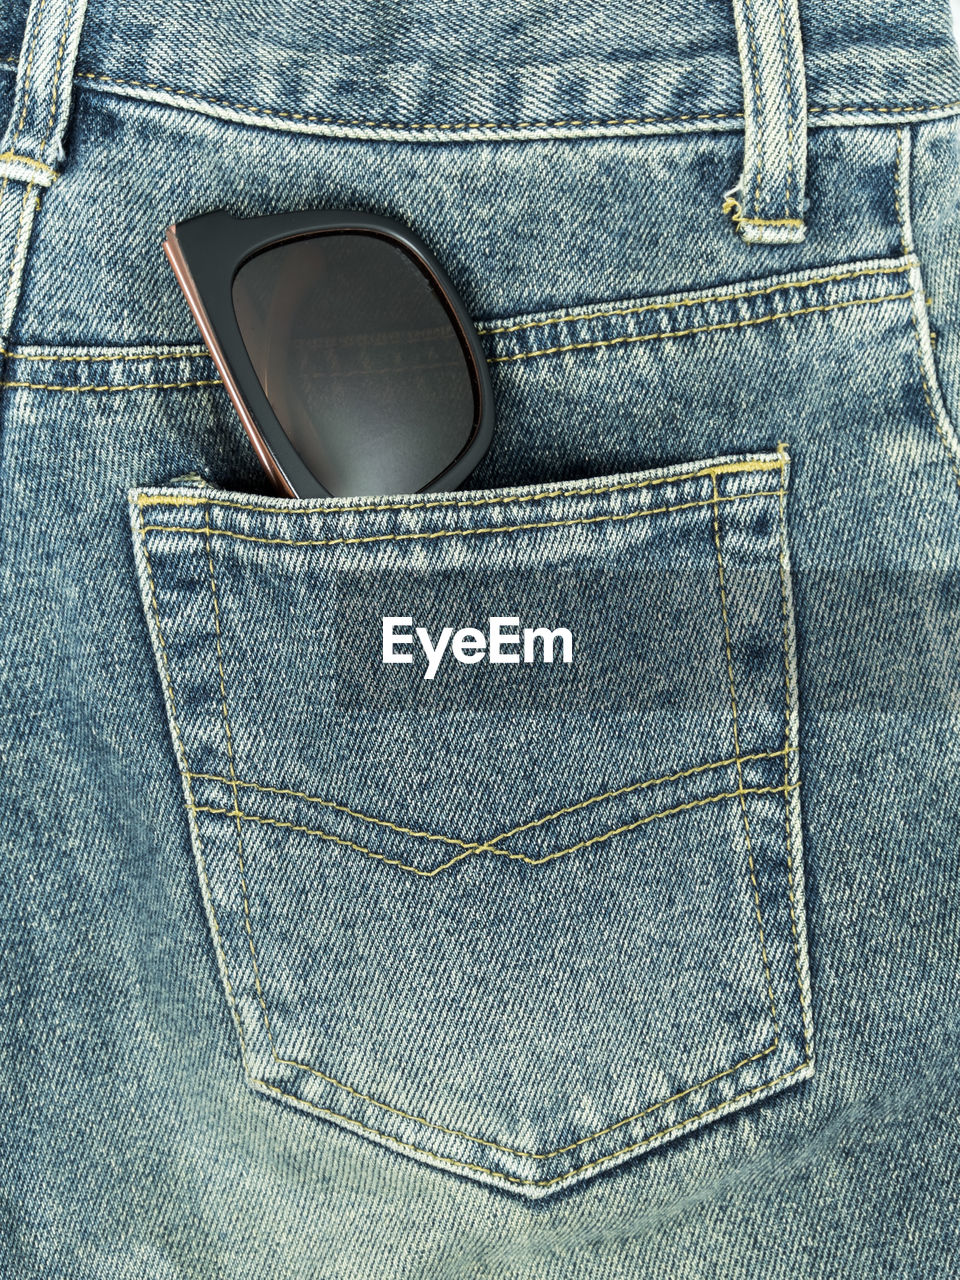 Sunglasses in jeans pocket